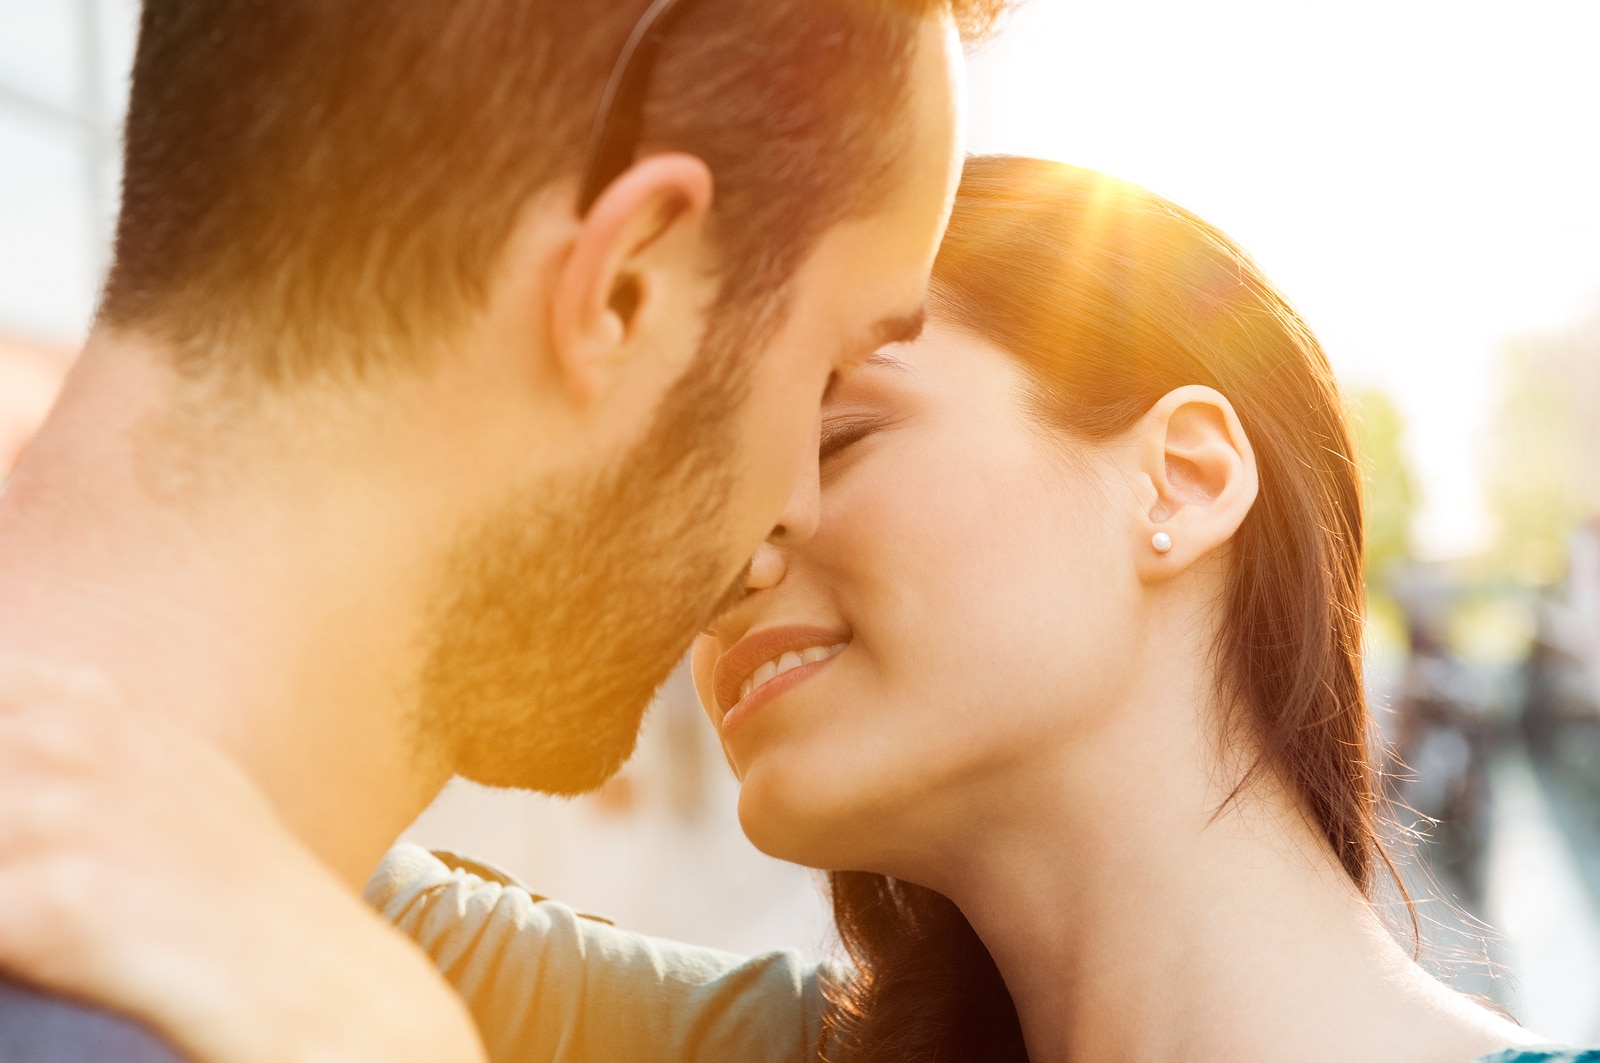 Closeup shot of young couple kissing outdoor. Close up of loving couple embracing and kissing. Shallow depth of field with focus on young couple kissing.